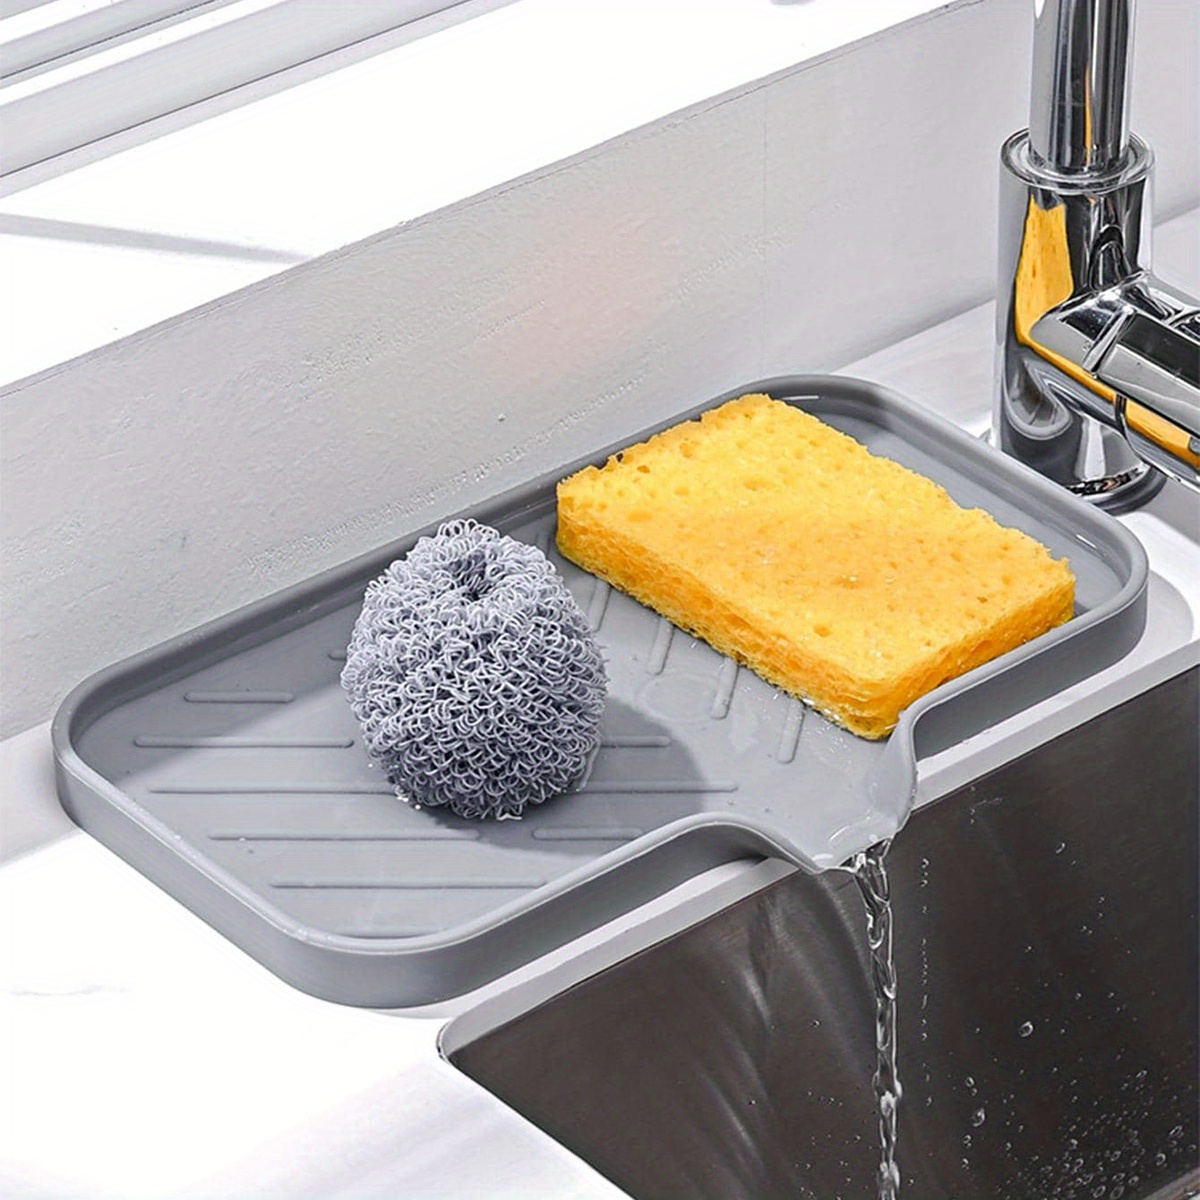 Large Silicone Sponge Holder - Self Draining Dish Soap Holder for Kitchen  Counter, Waterproof Sponge Soap Tray for Kitchen Sink Bathroom, Sink Caddy